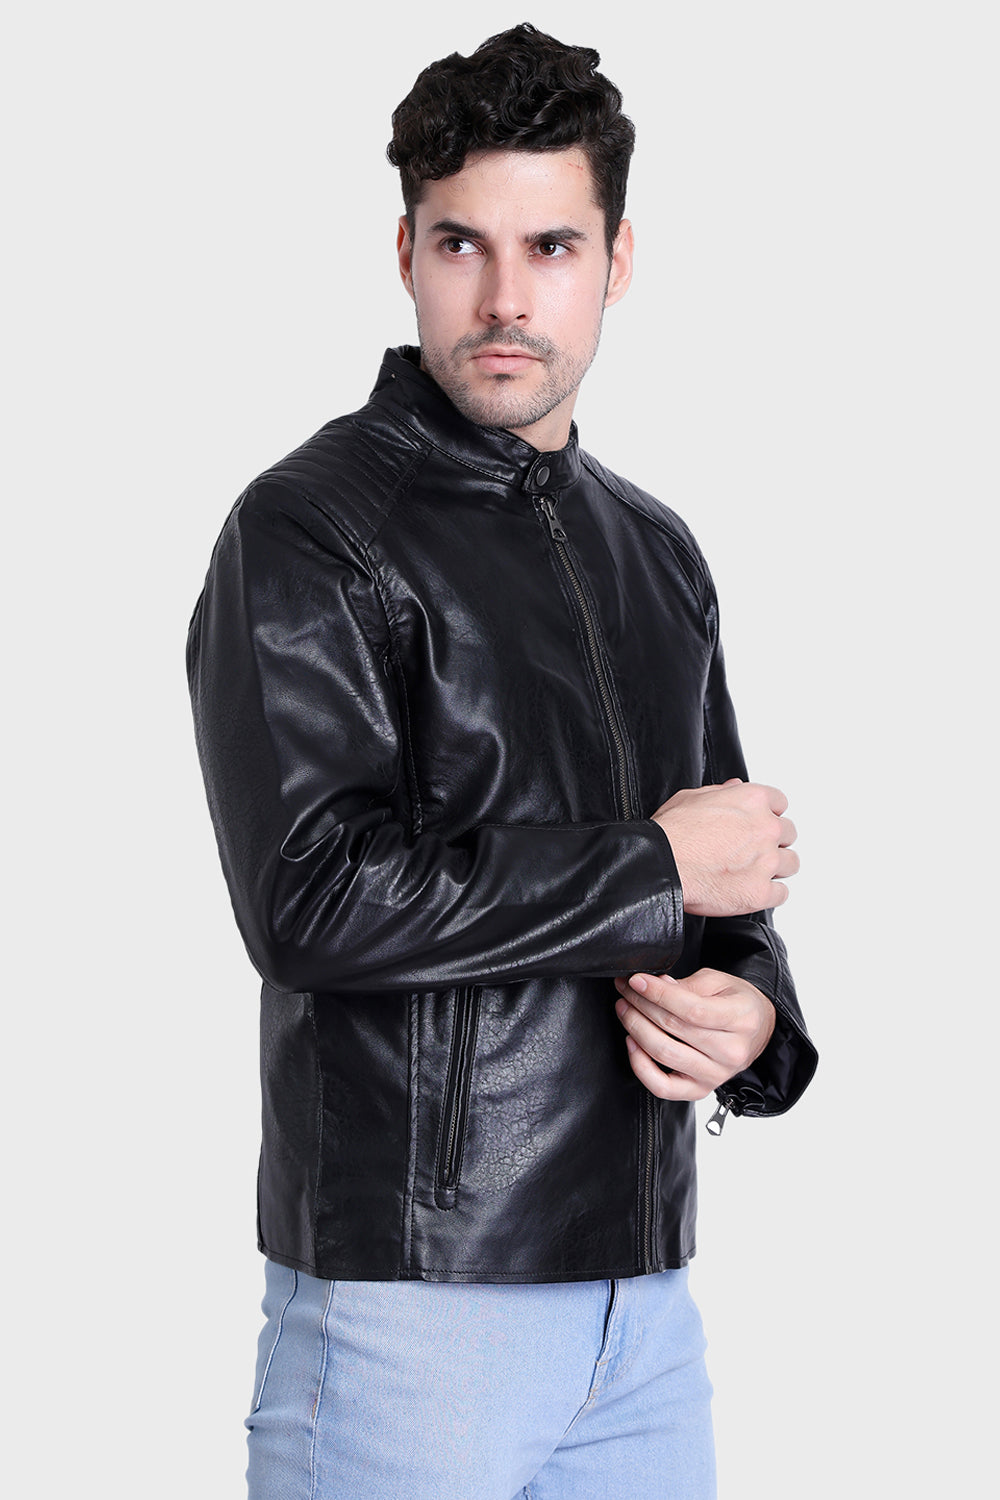 Justanned Classic Coal Leather Jacket